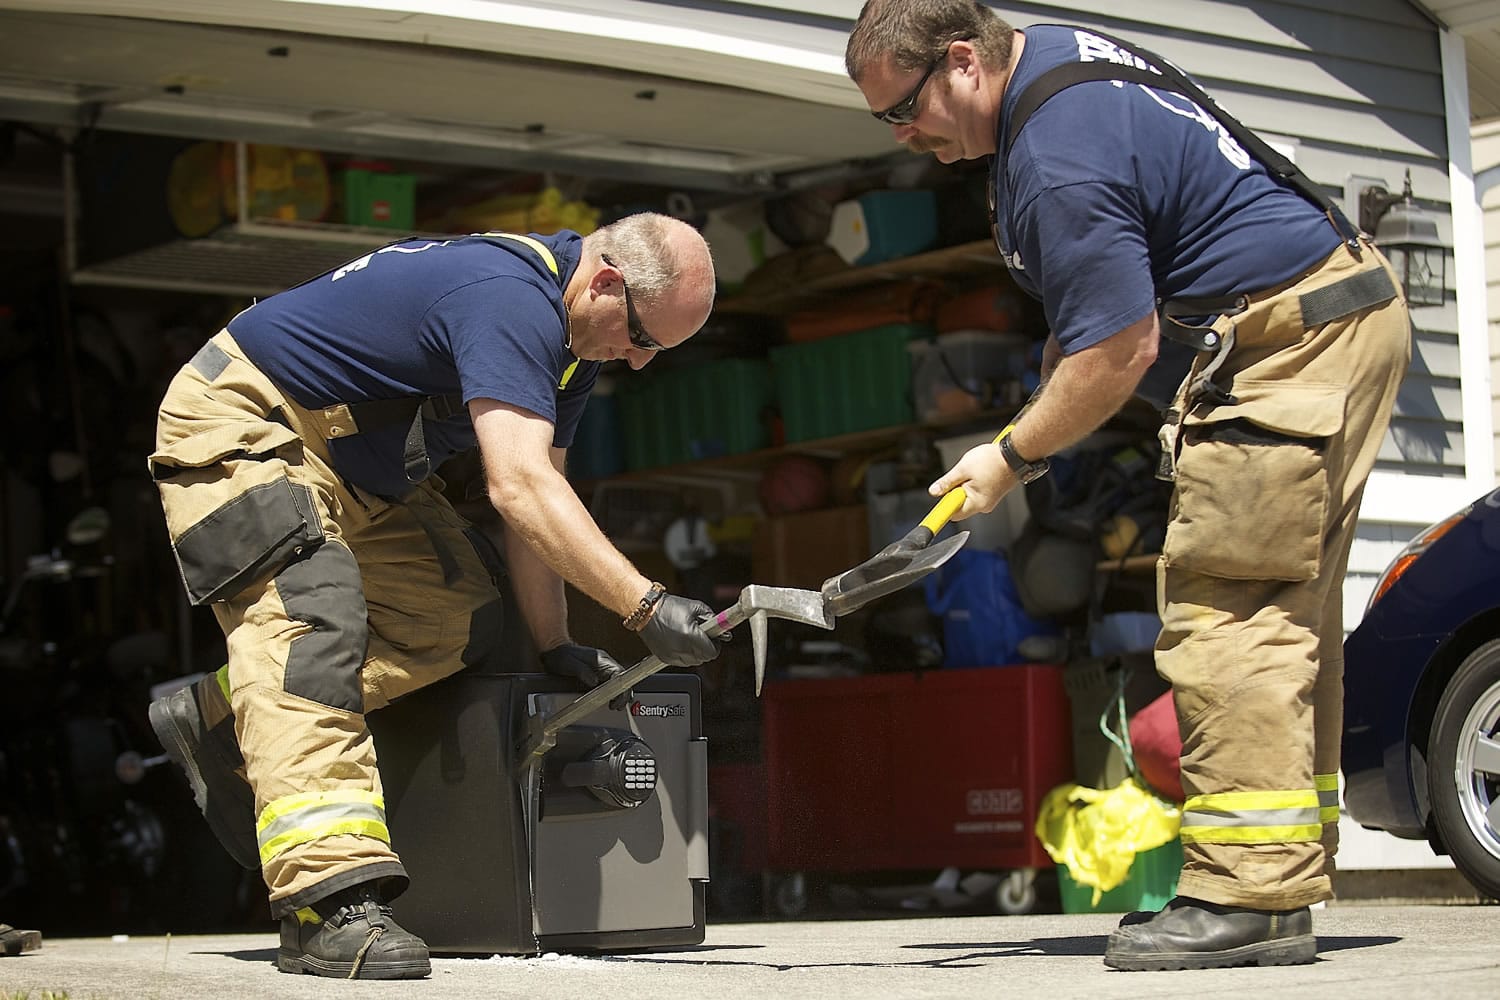 Clark County Fire District 6 firefighters David Fisher, left, and Darren Bush force open a safe July 24 for the Clark-Vancouver Drug Task Force in a search for evidence at the home of a suspected drug dealer.